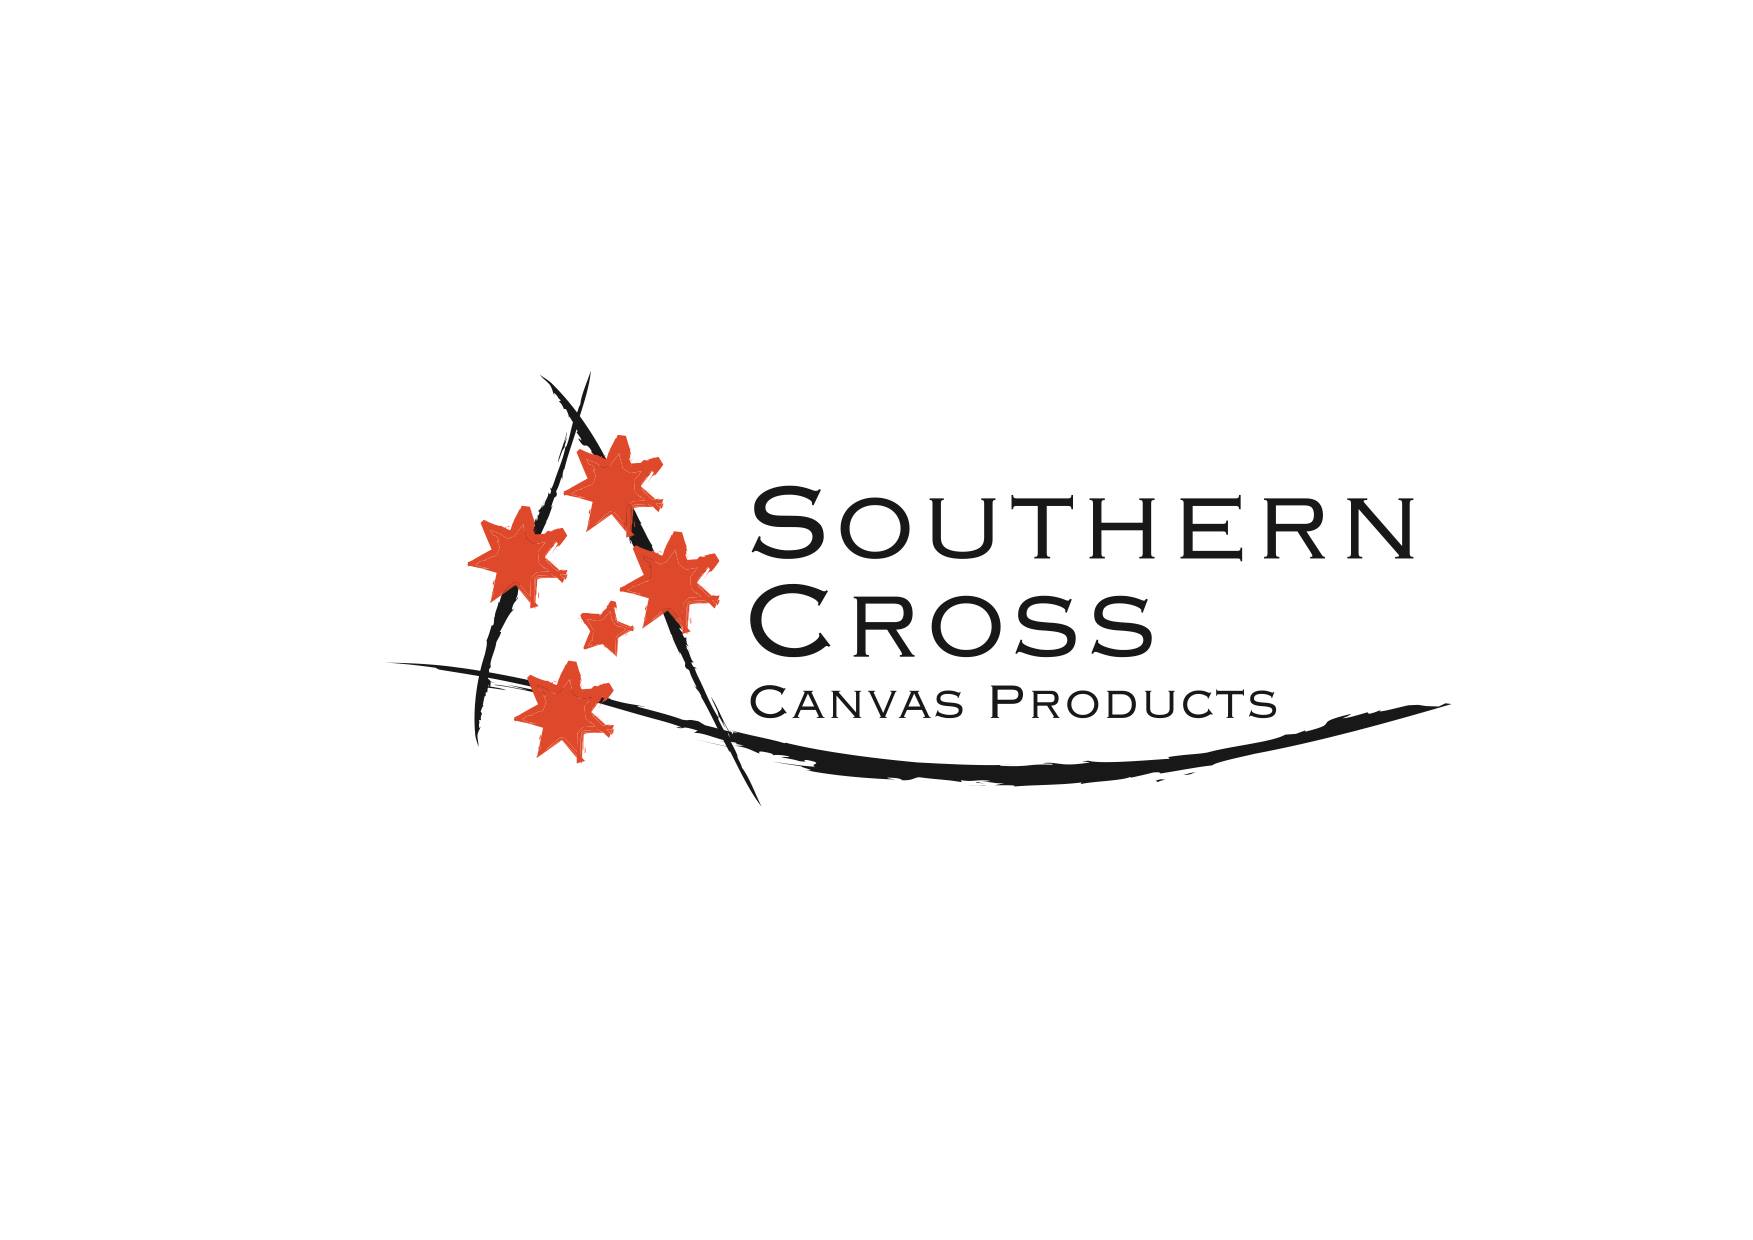 Southern Cross Canvas